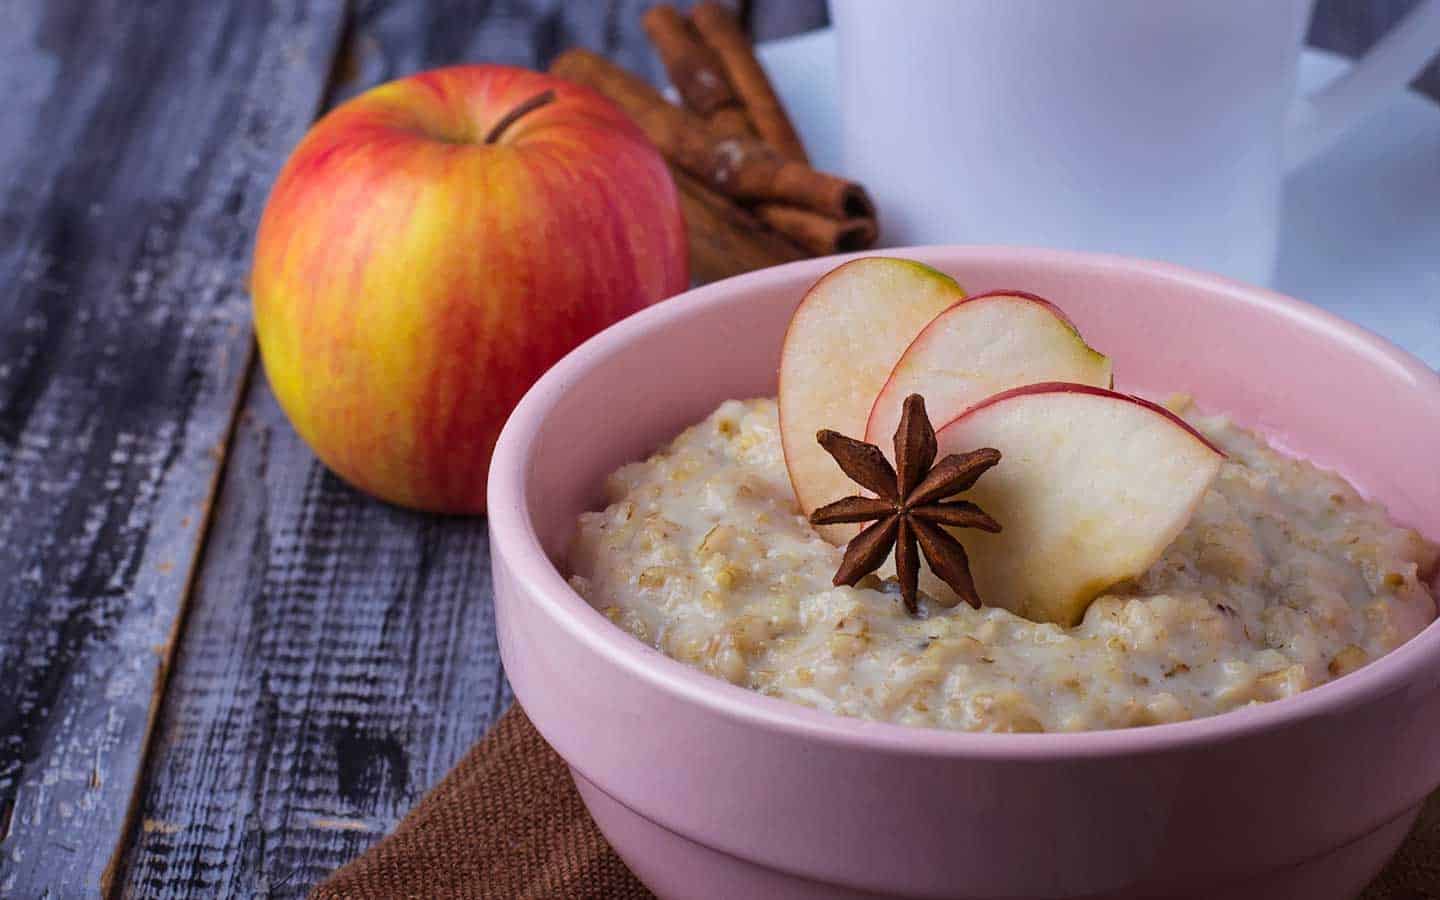 Oatmeal makes breakfast quick and easy